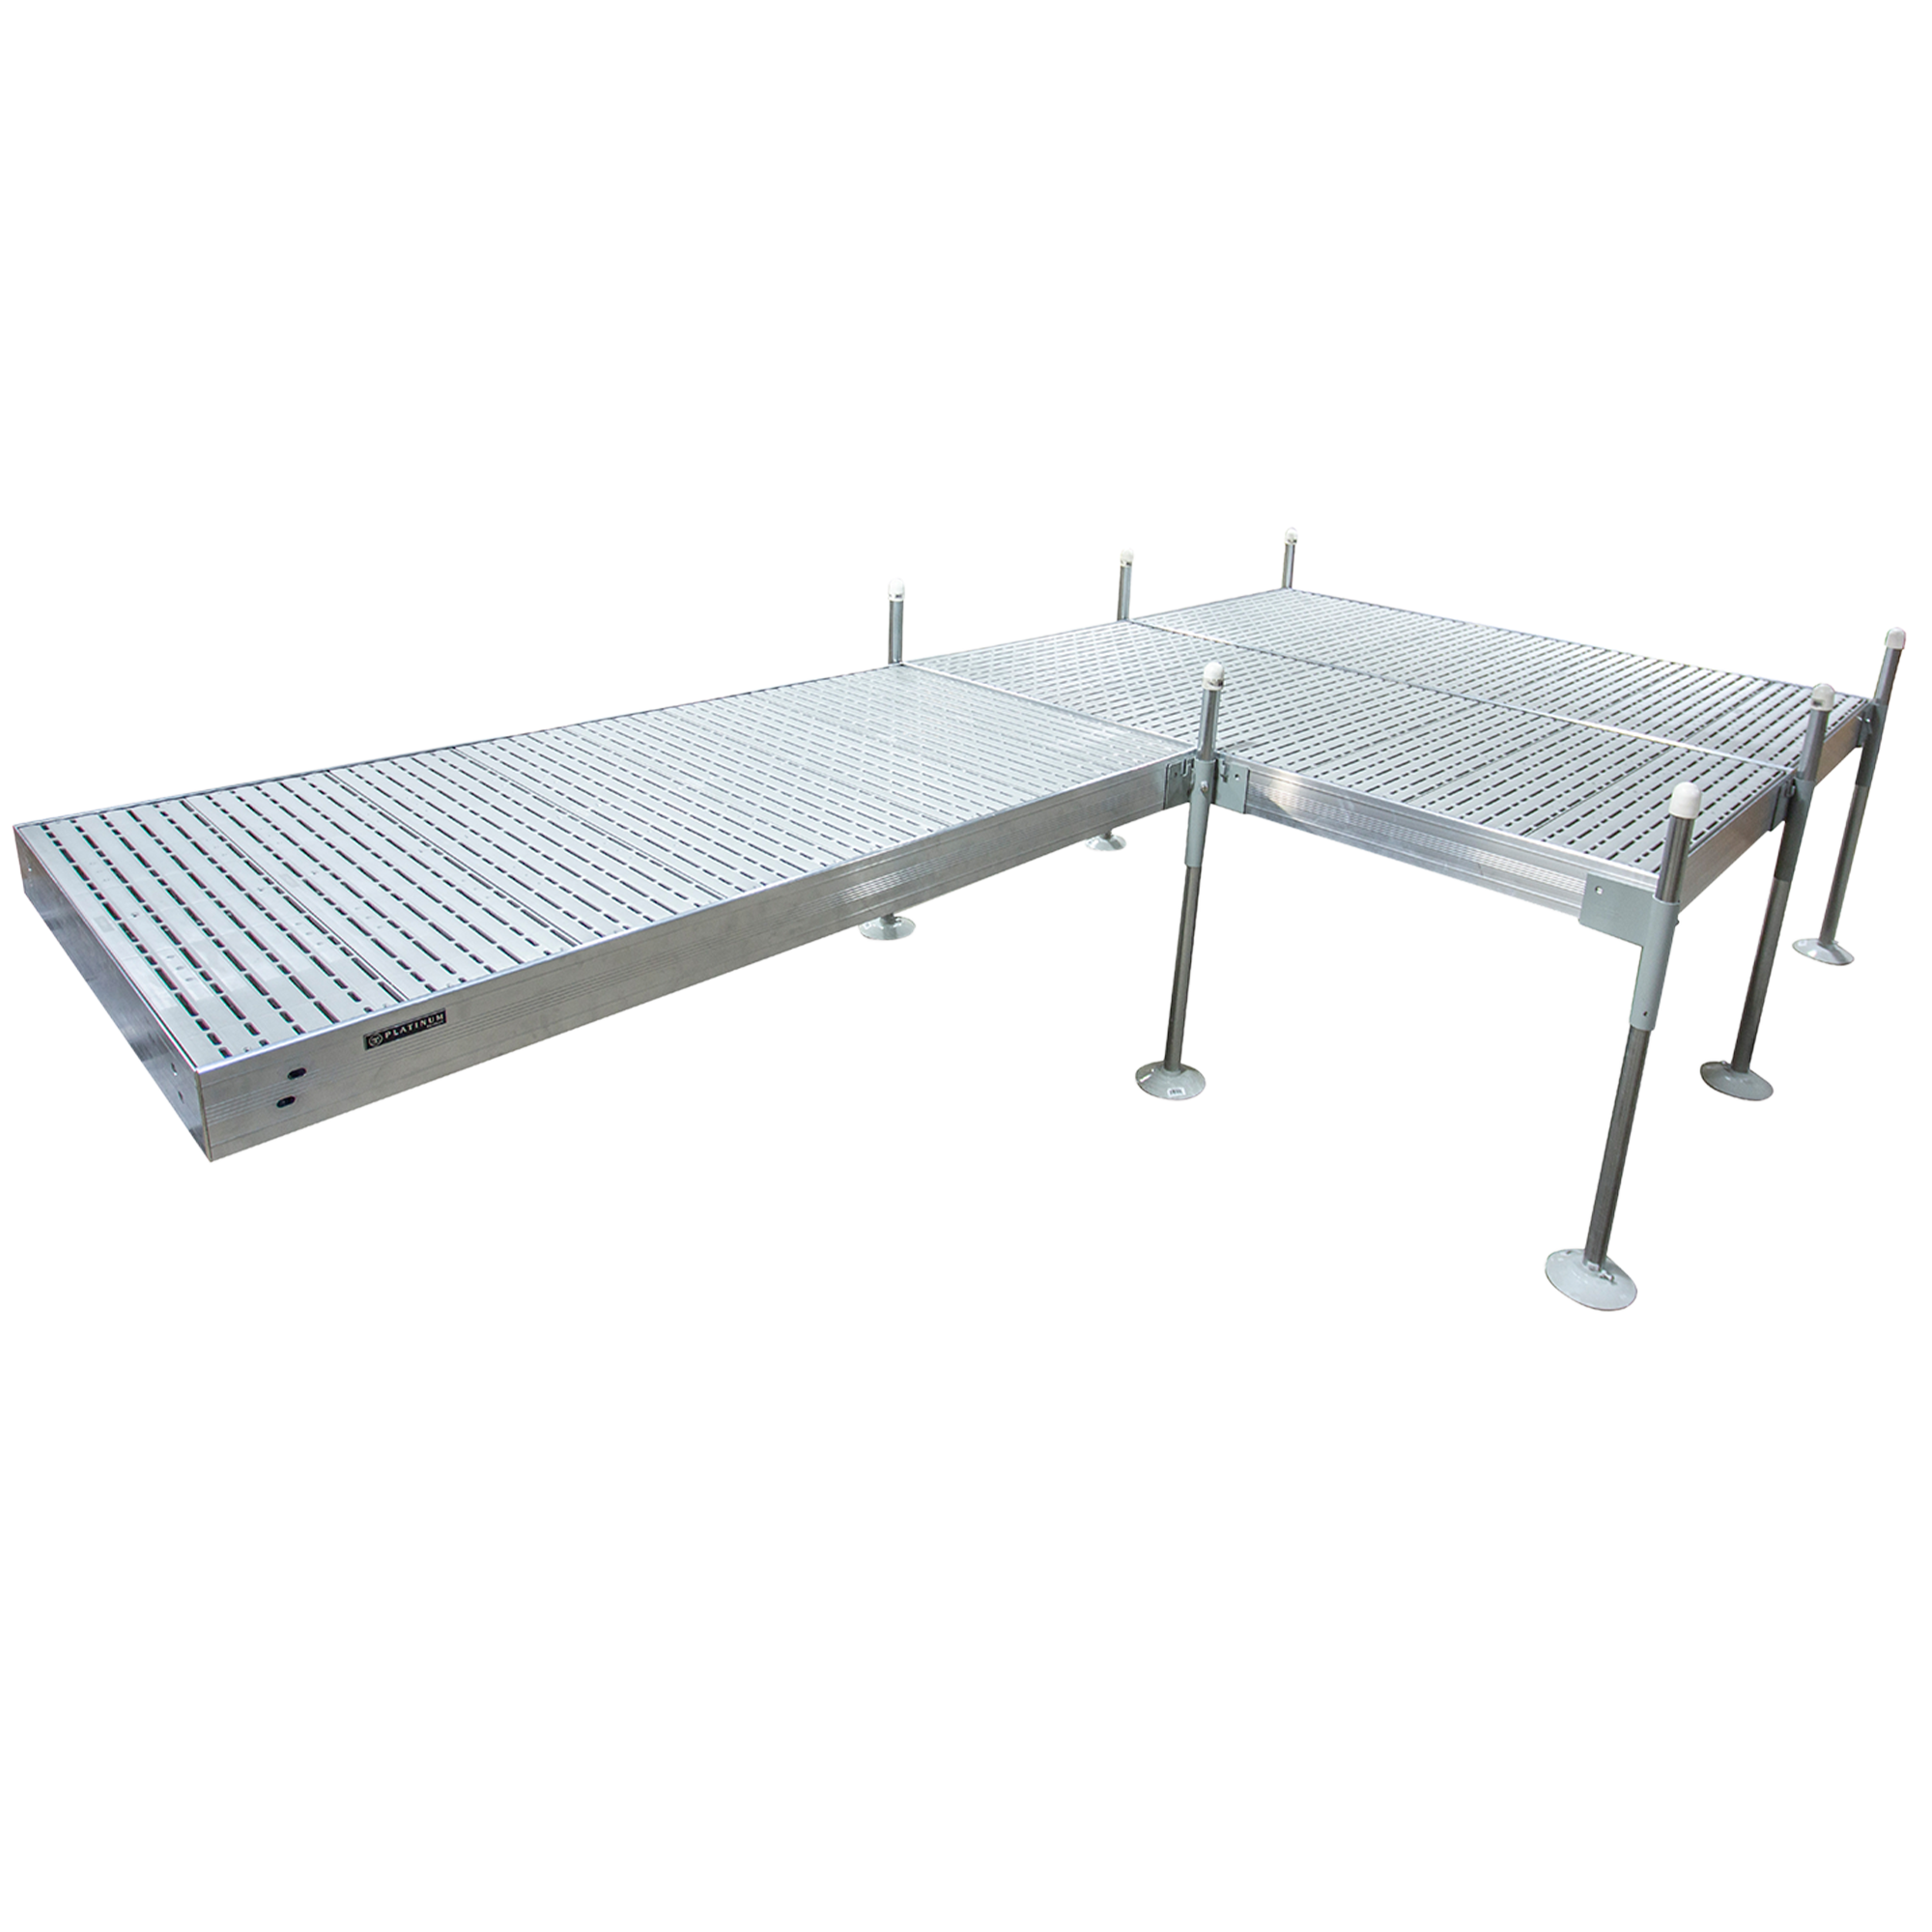 16' Platform Boat Dock System with Aluminum Frame and Gray Titan Decking